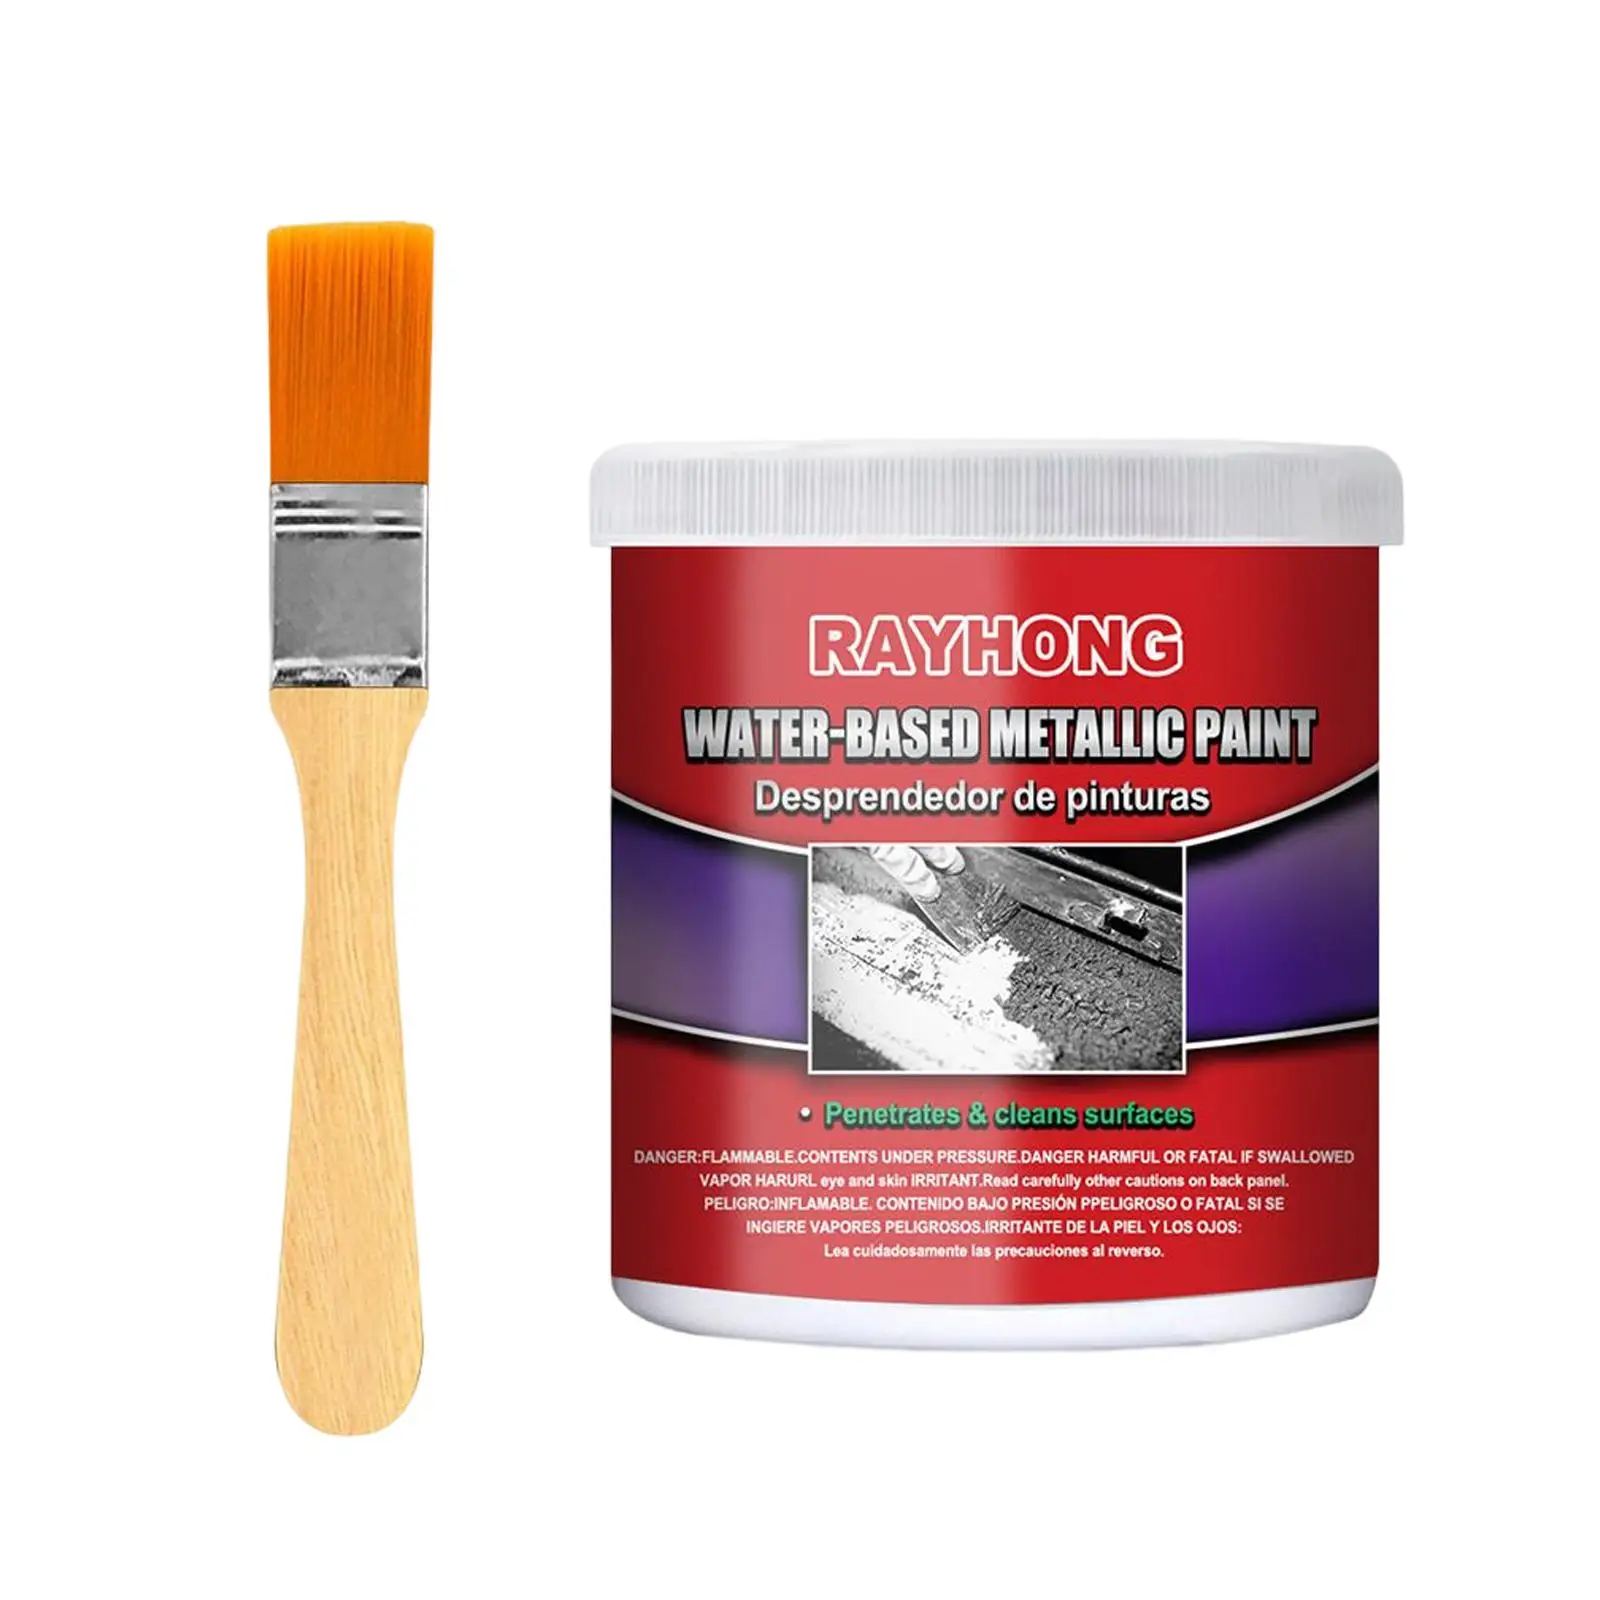 Water based Metal Rust Remover Car Metallic Paint Fit for Car Mower SUV